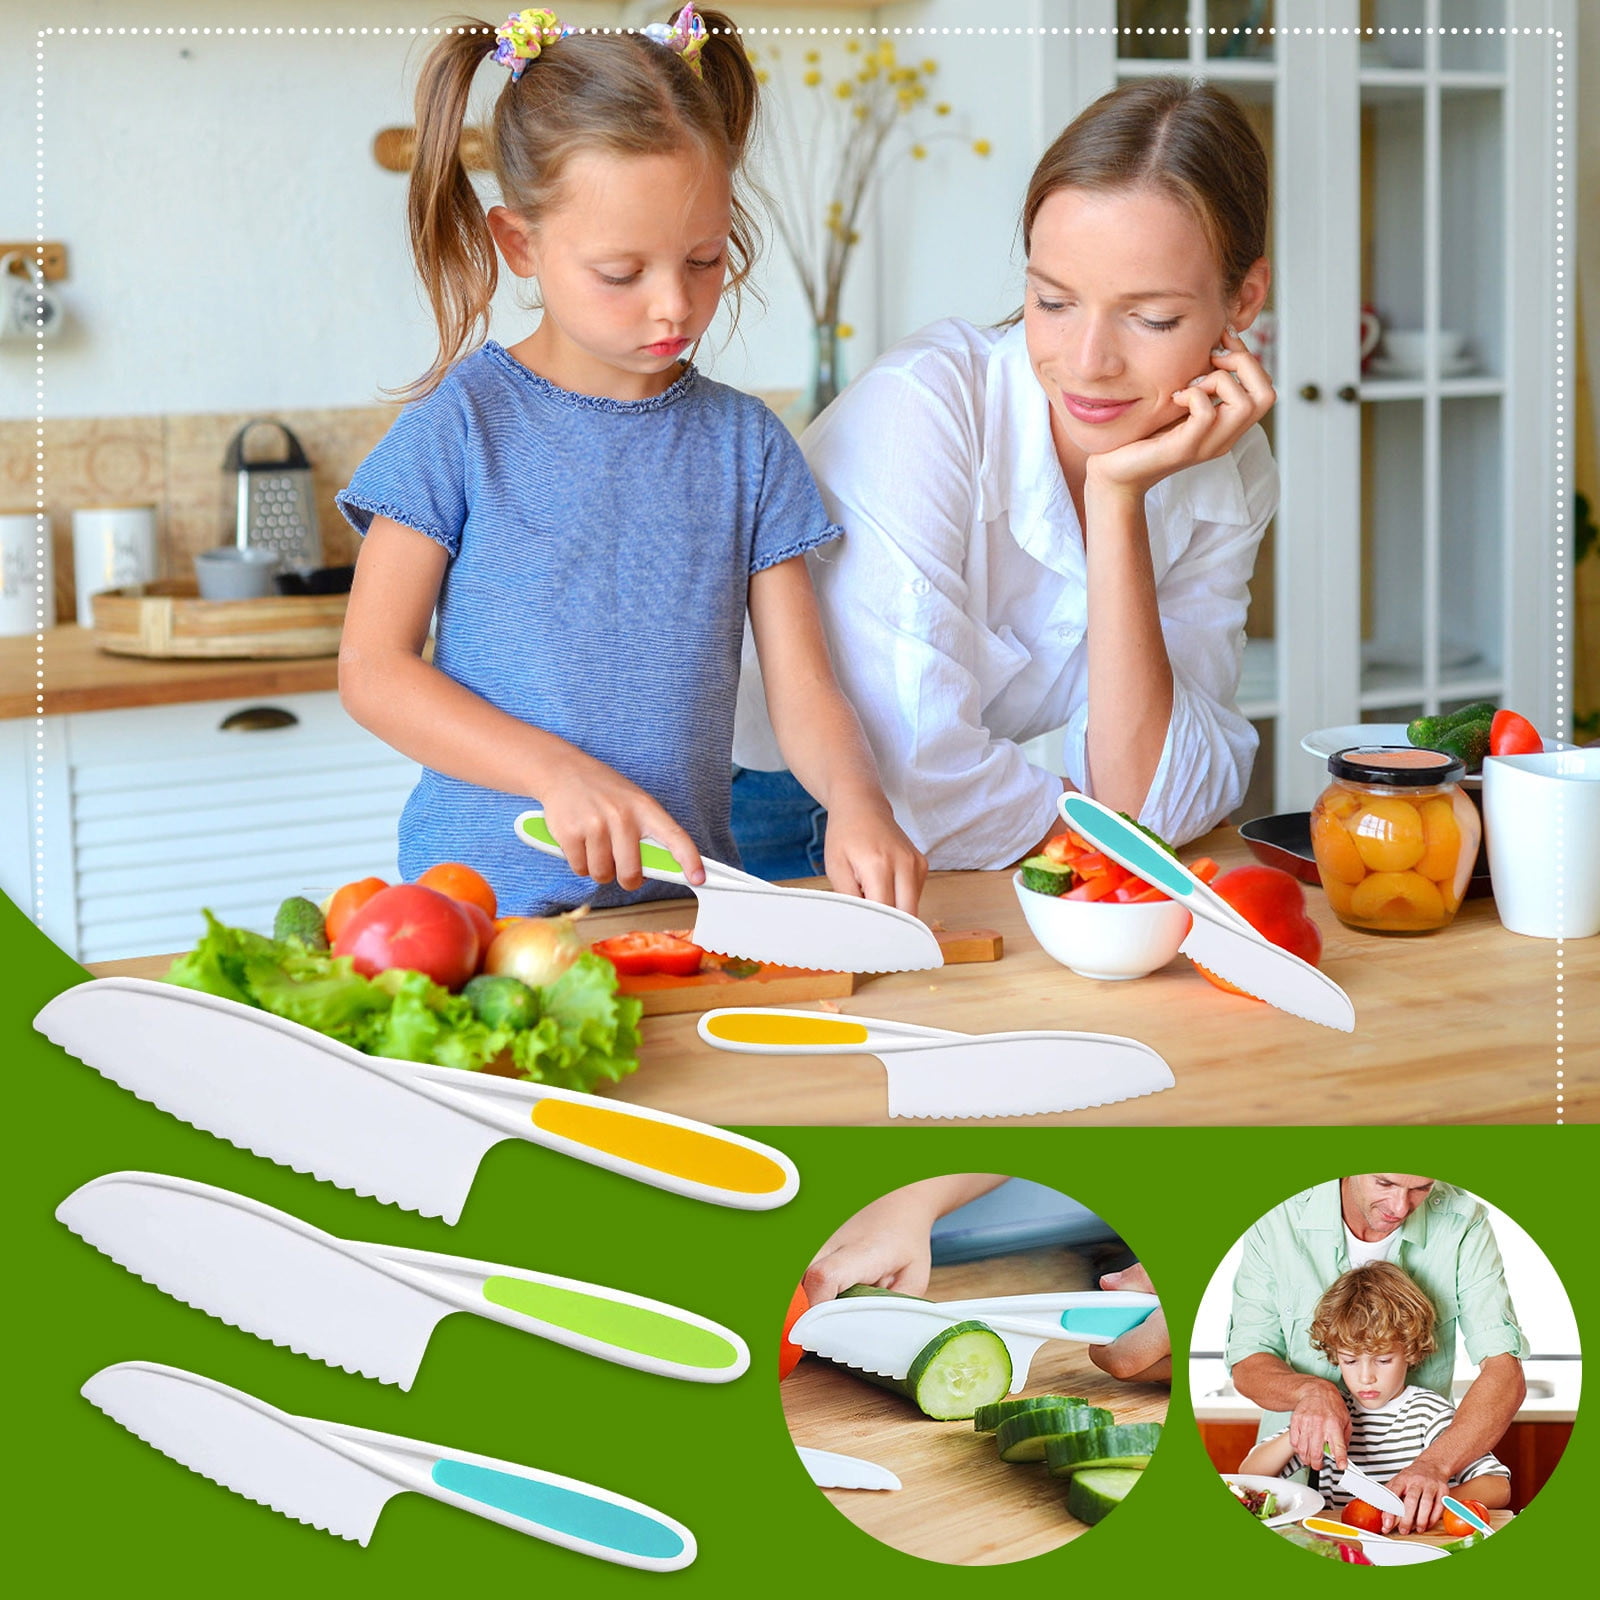 Topboutique Kitchen Safety Knives for Kids, Children's Cooking Knives in 3  Sizes & Colors/Firm Grip, Serrated Edges for Vegetables, Fruits, Salad,  Cake 